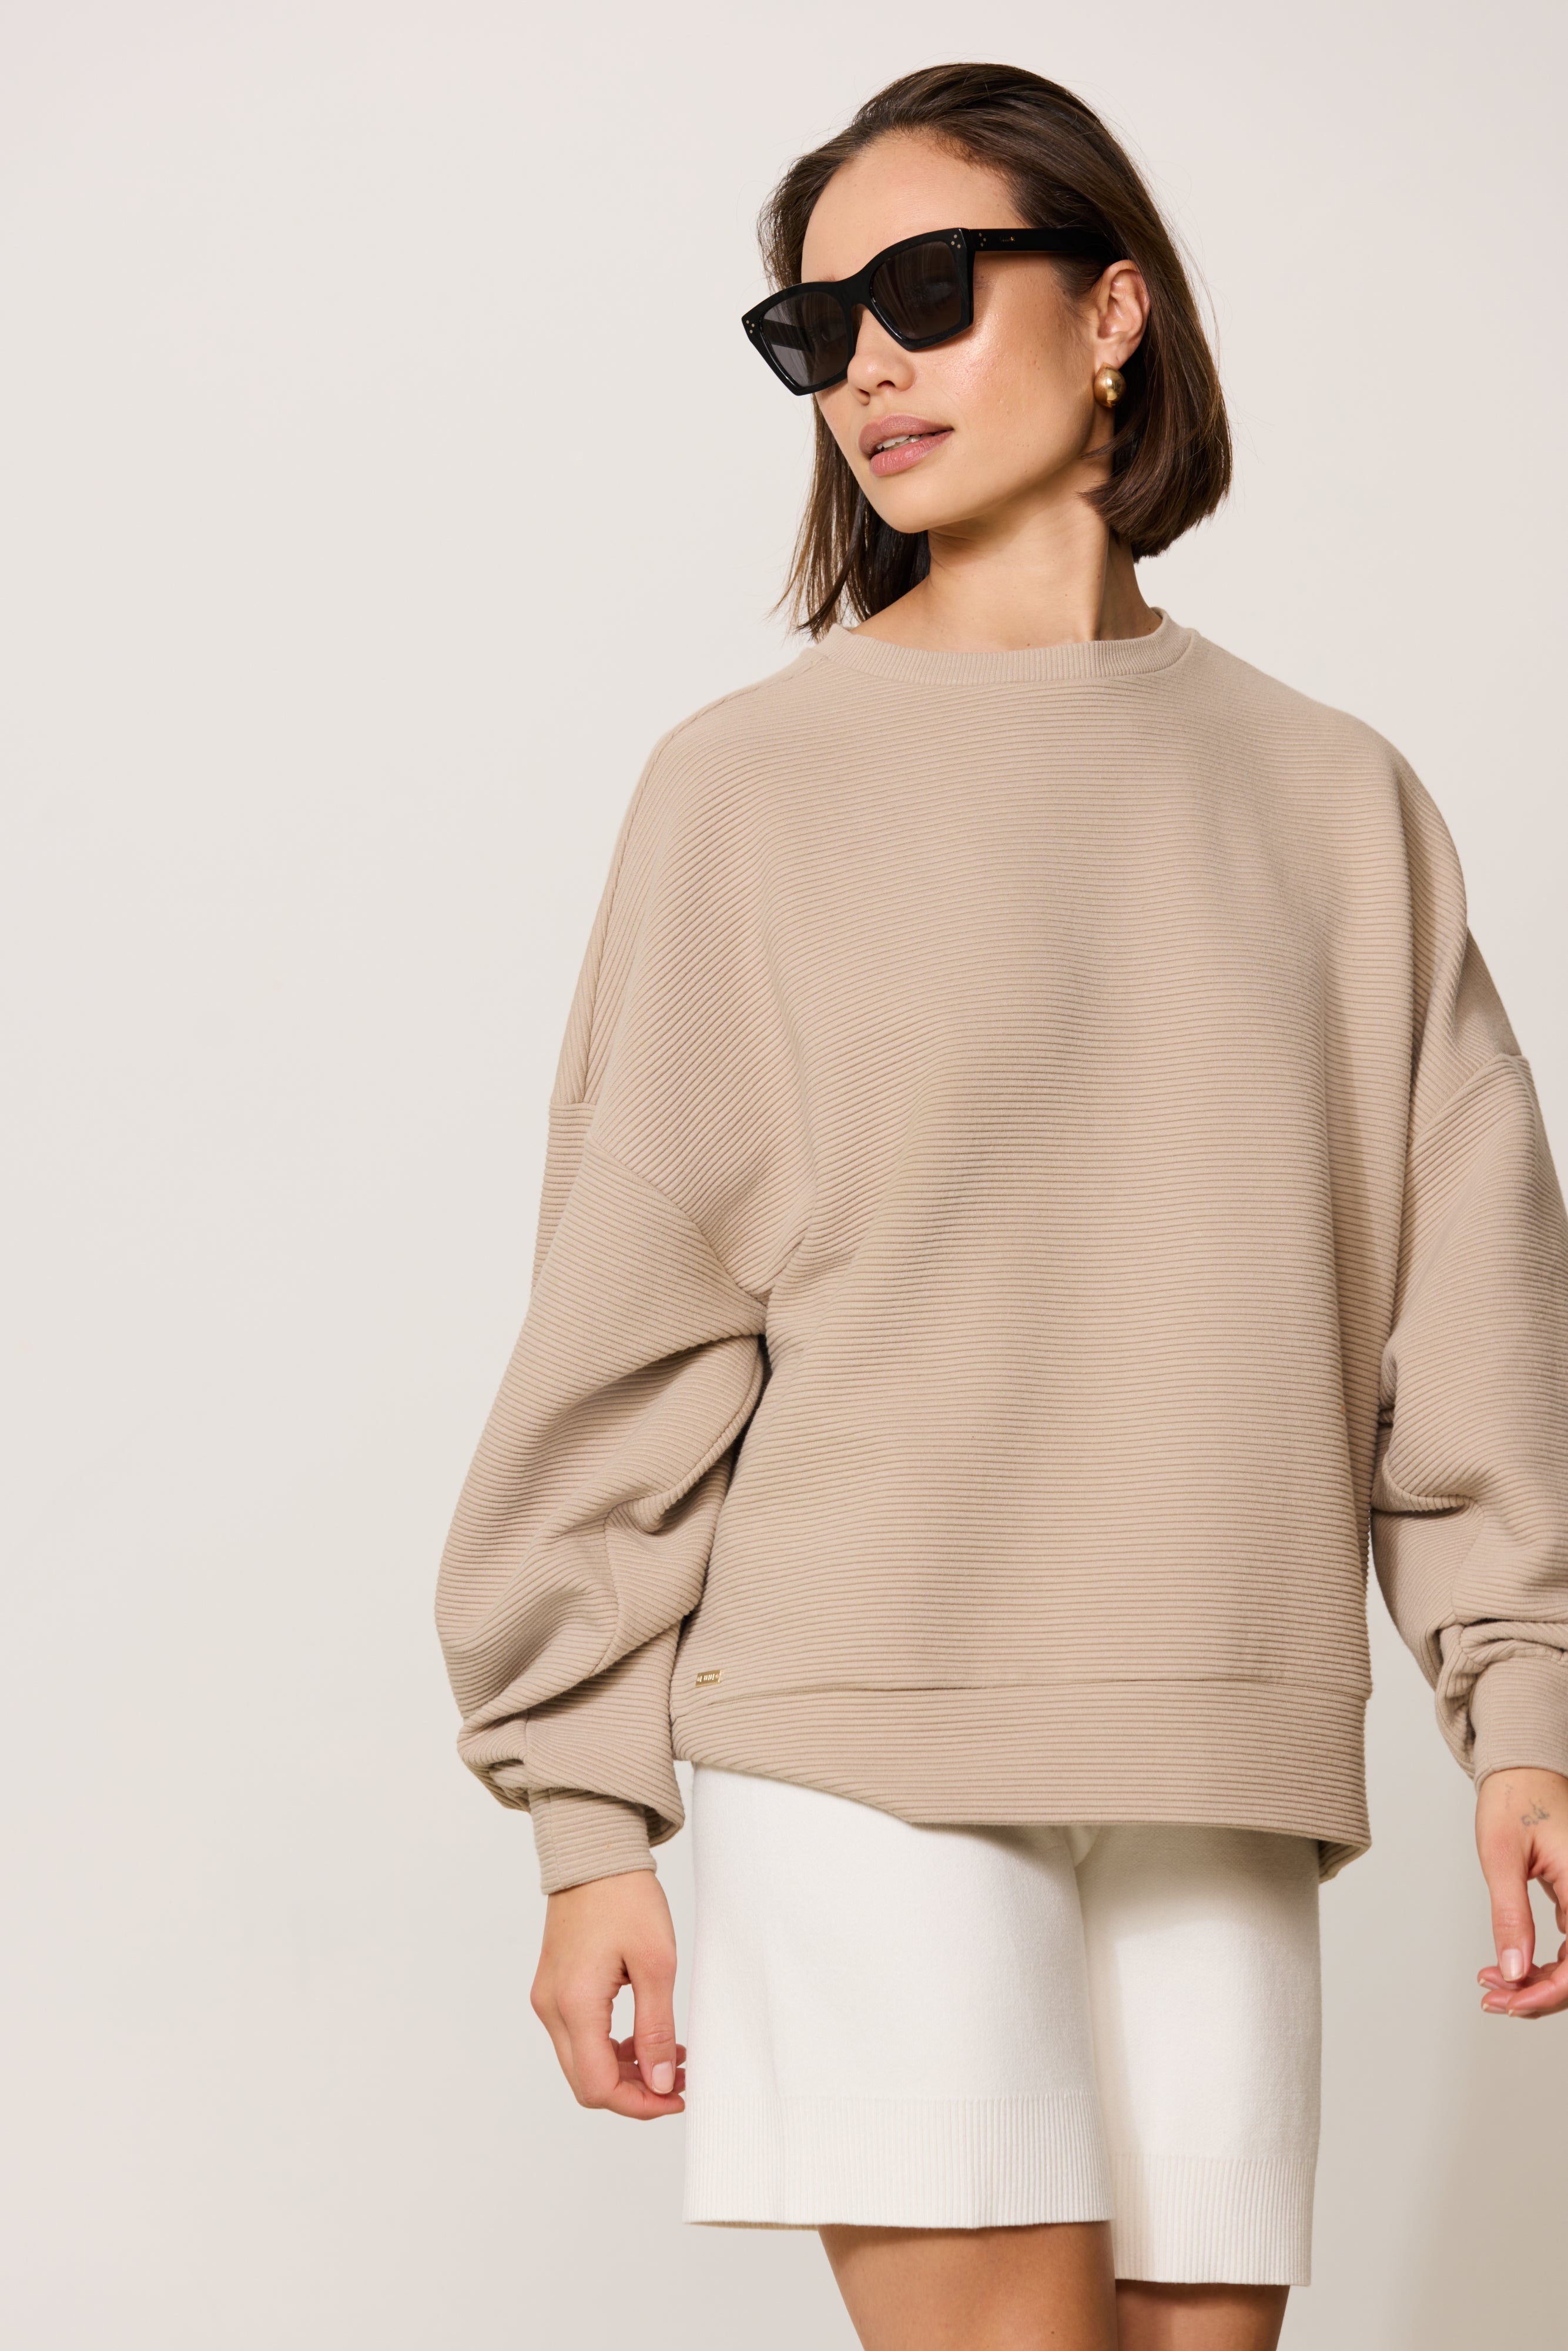 AMBER modern fit crew - Pure Cashmere